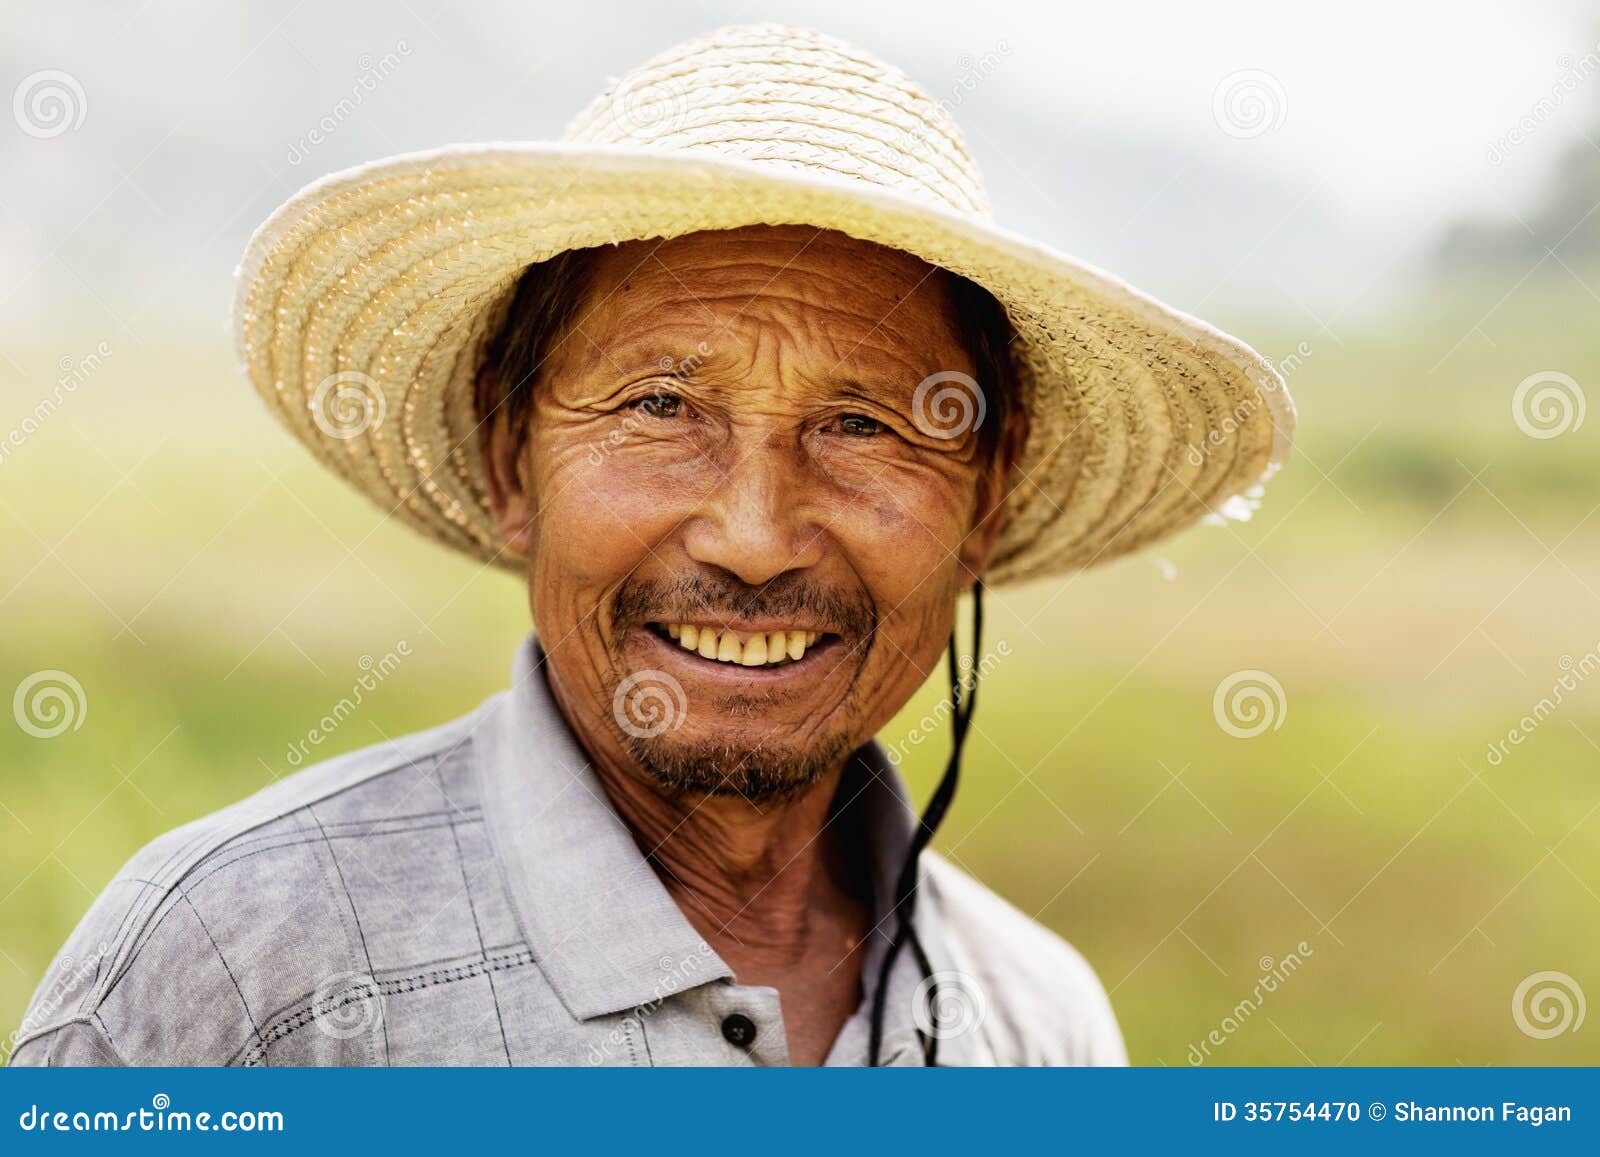 portrait of smiling farmer, rural china, shanxi province